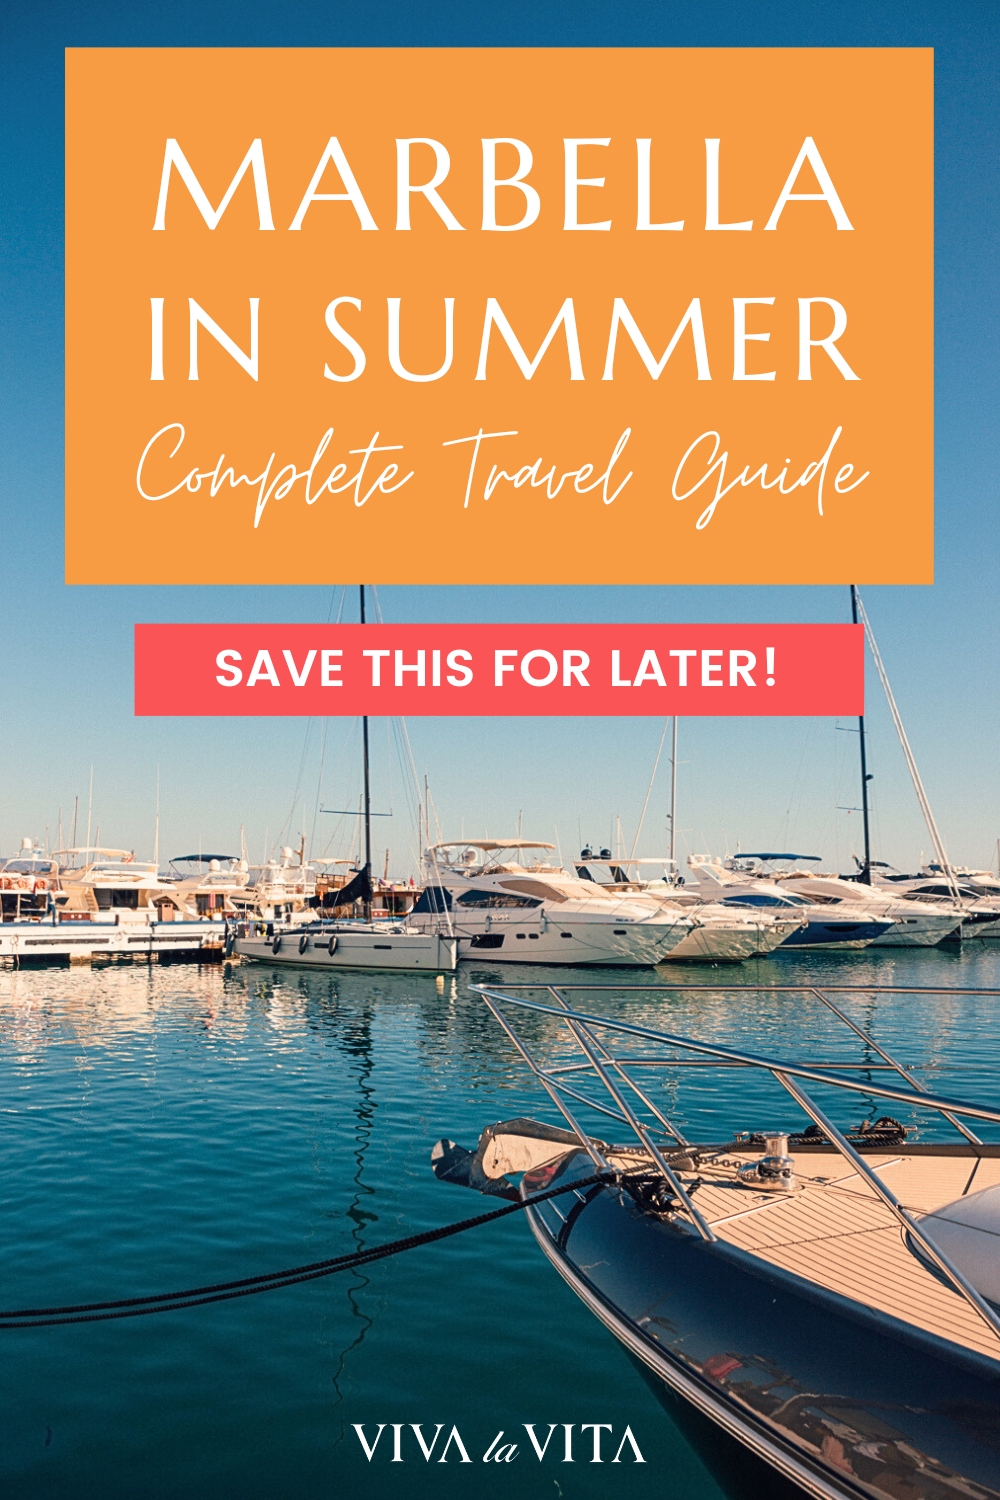 Pinterest image showing the marina of Puerto Banus in Marbella, Southern Spain, with a headline that reads - Marbella in Summer - Complete Travel Guide